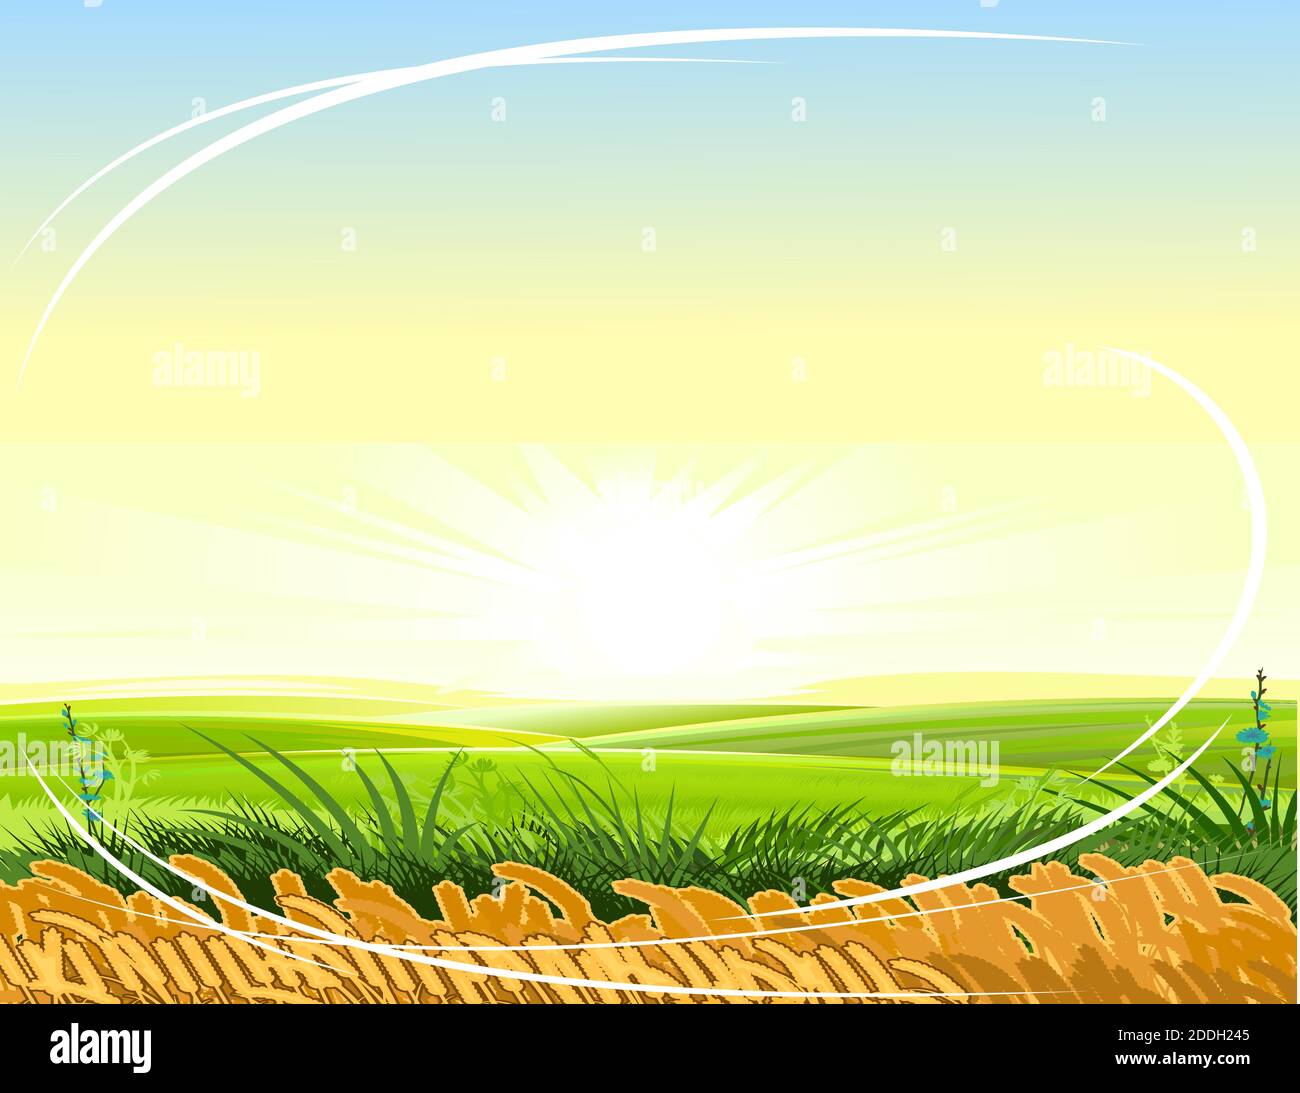 Wheat field. Rural hills and meadows. Scenery. Horizon. Pasture grass for cows and a place for vegetable gardens and farming. Beautiful view. Summer. Stock Vector